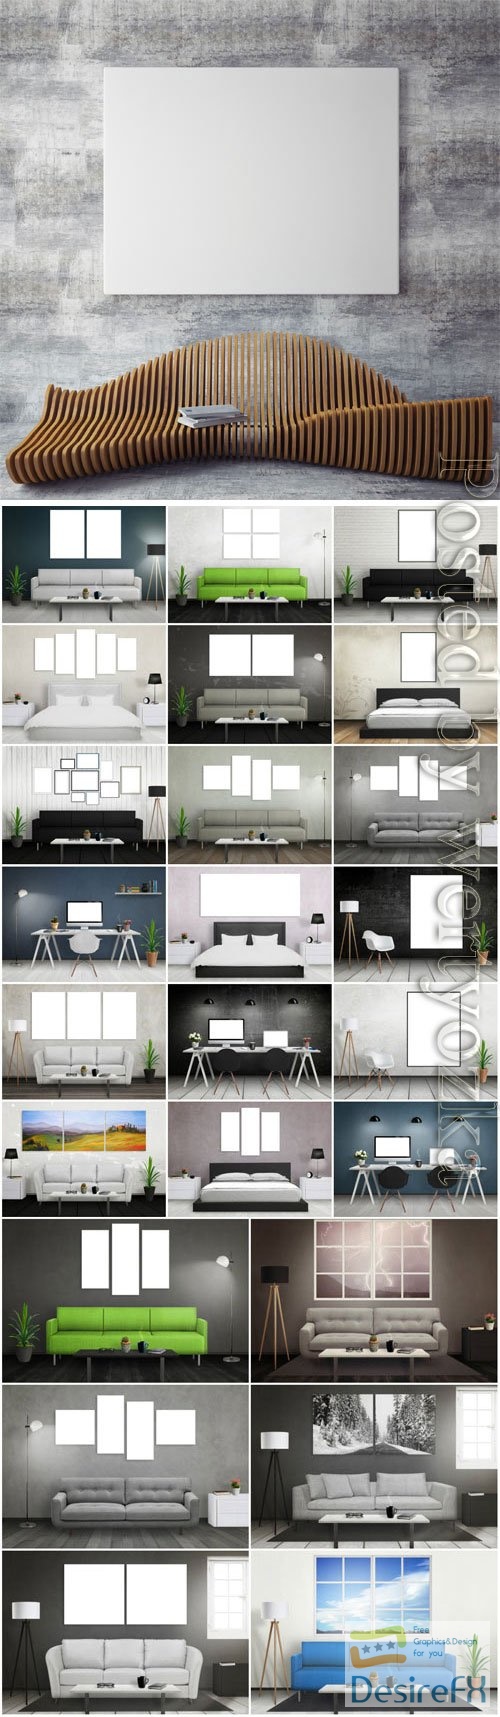 Interior in modern style, sofas and beds stock photo